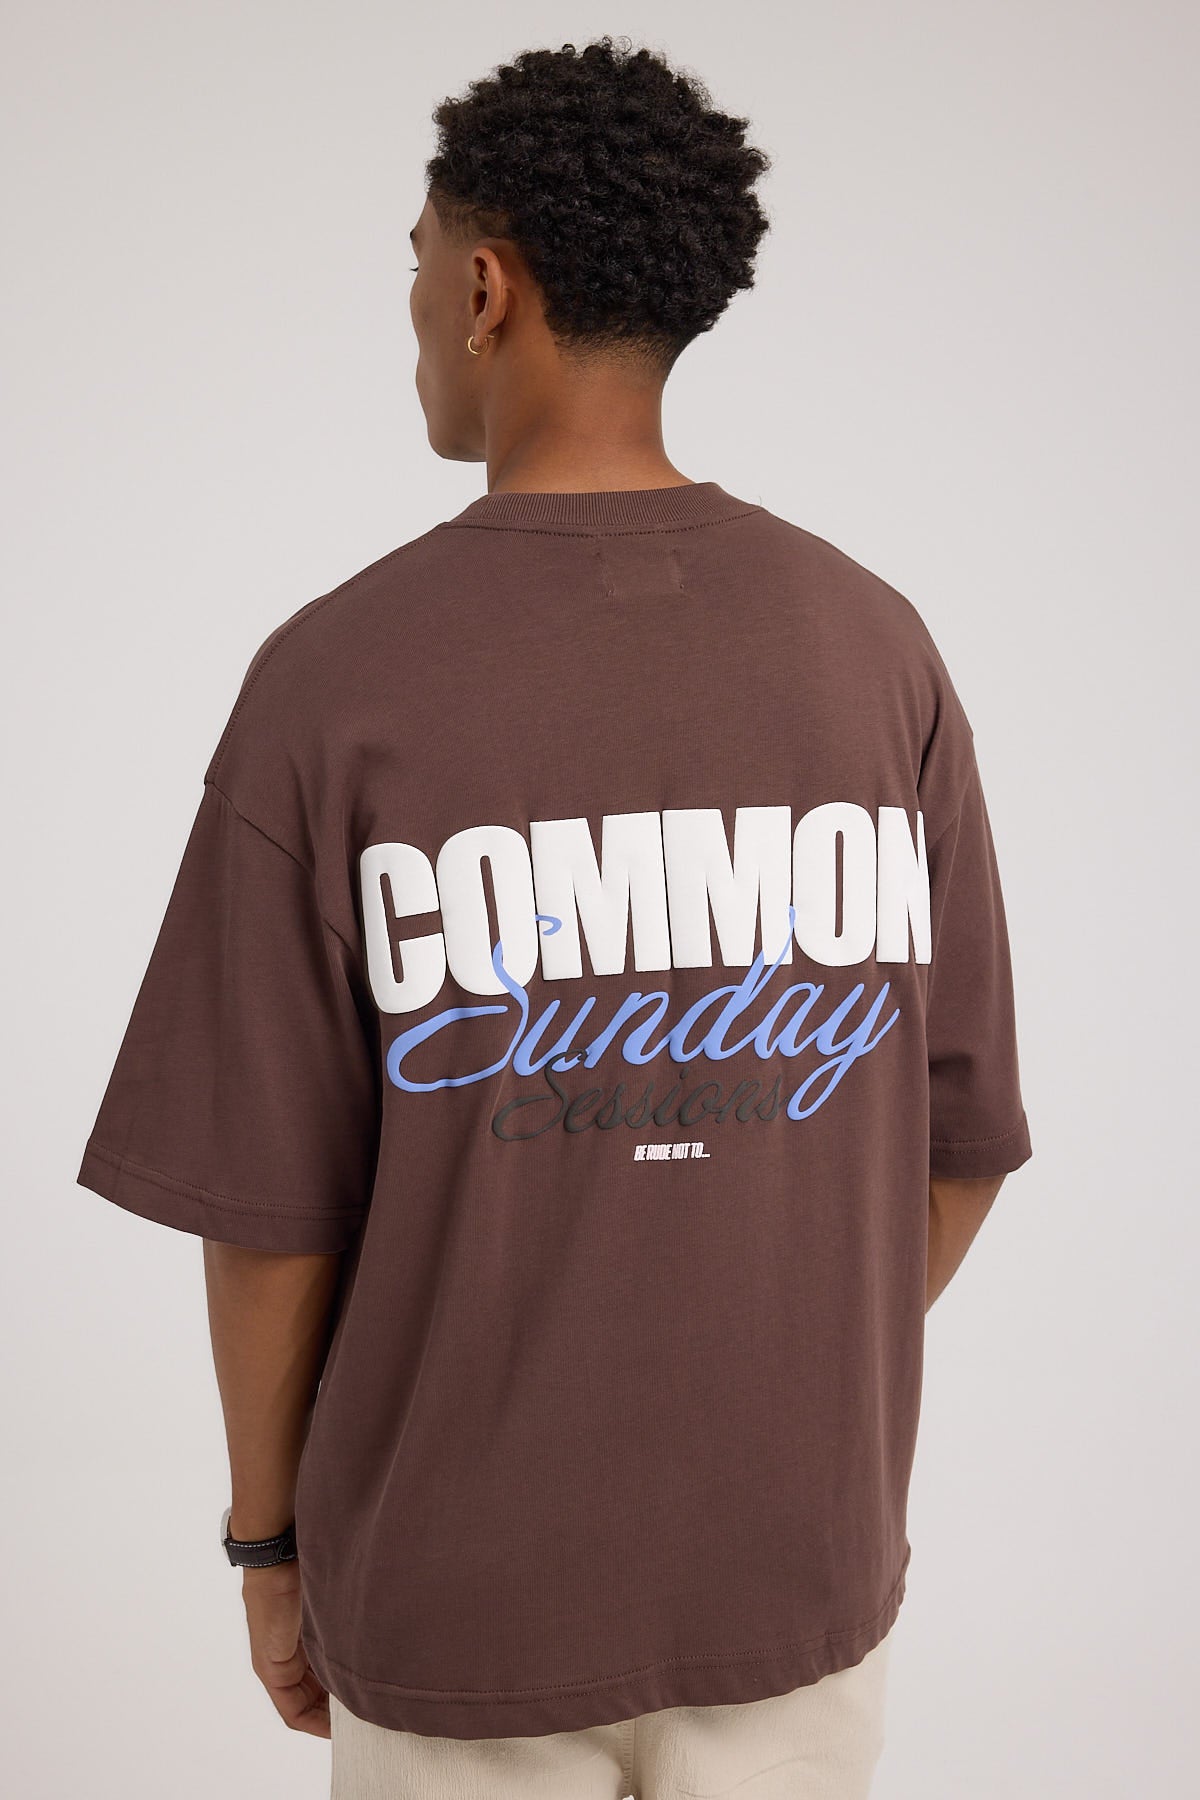 Common Need Session Easy Tee Brown